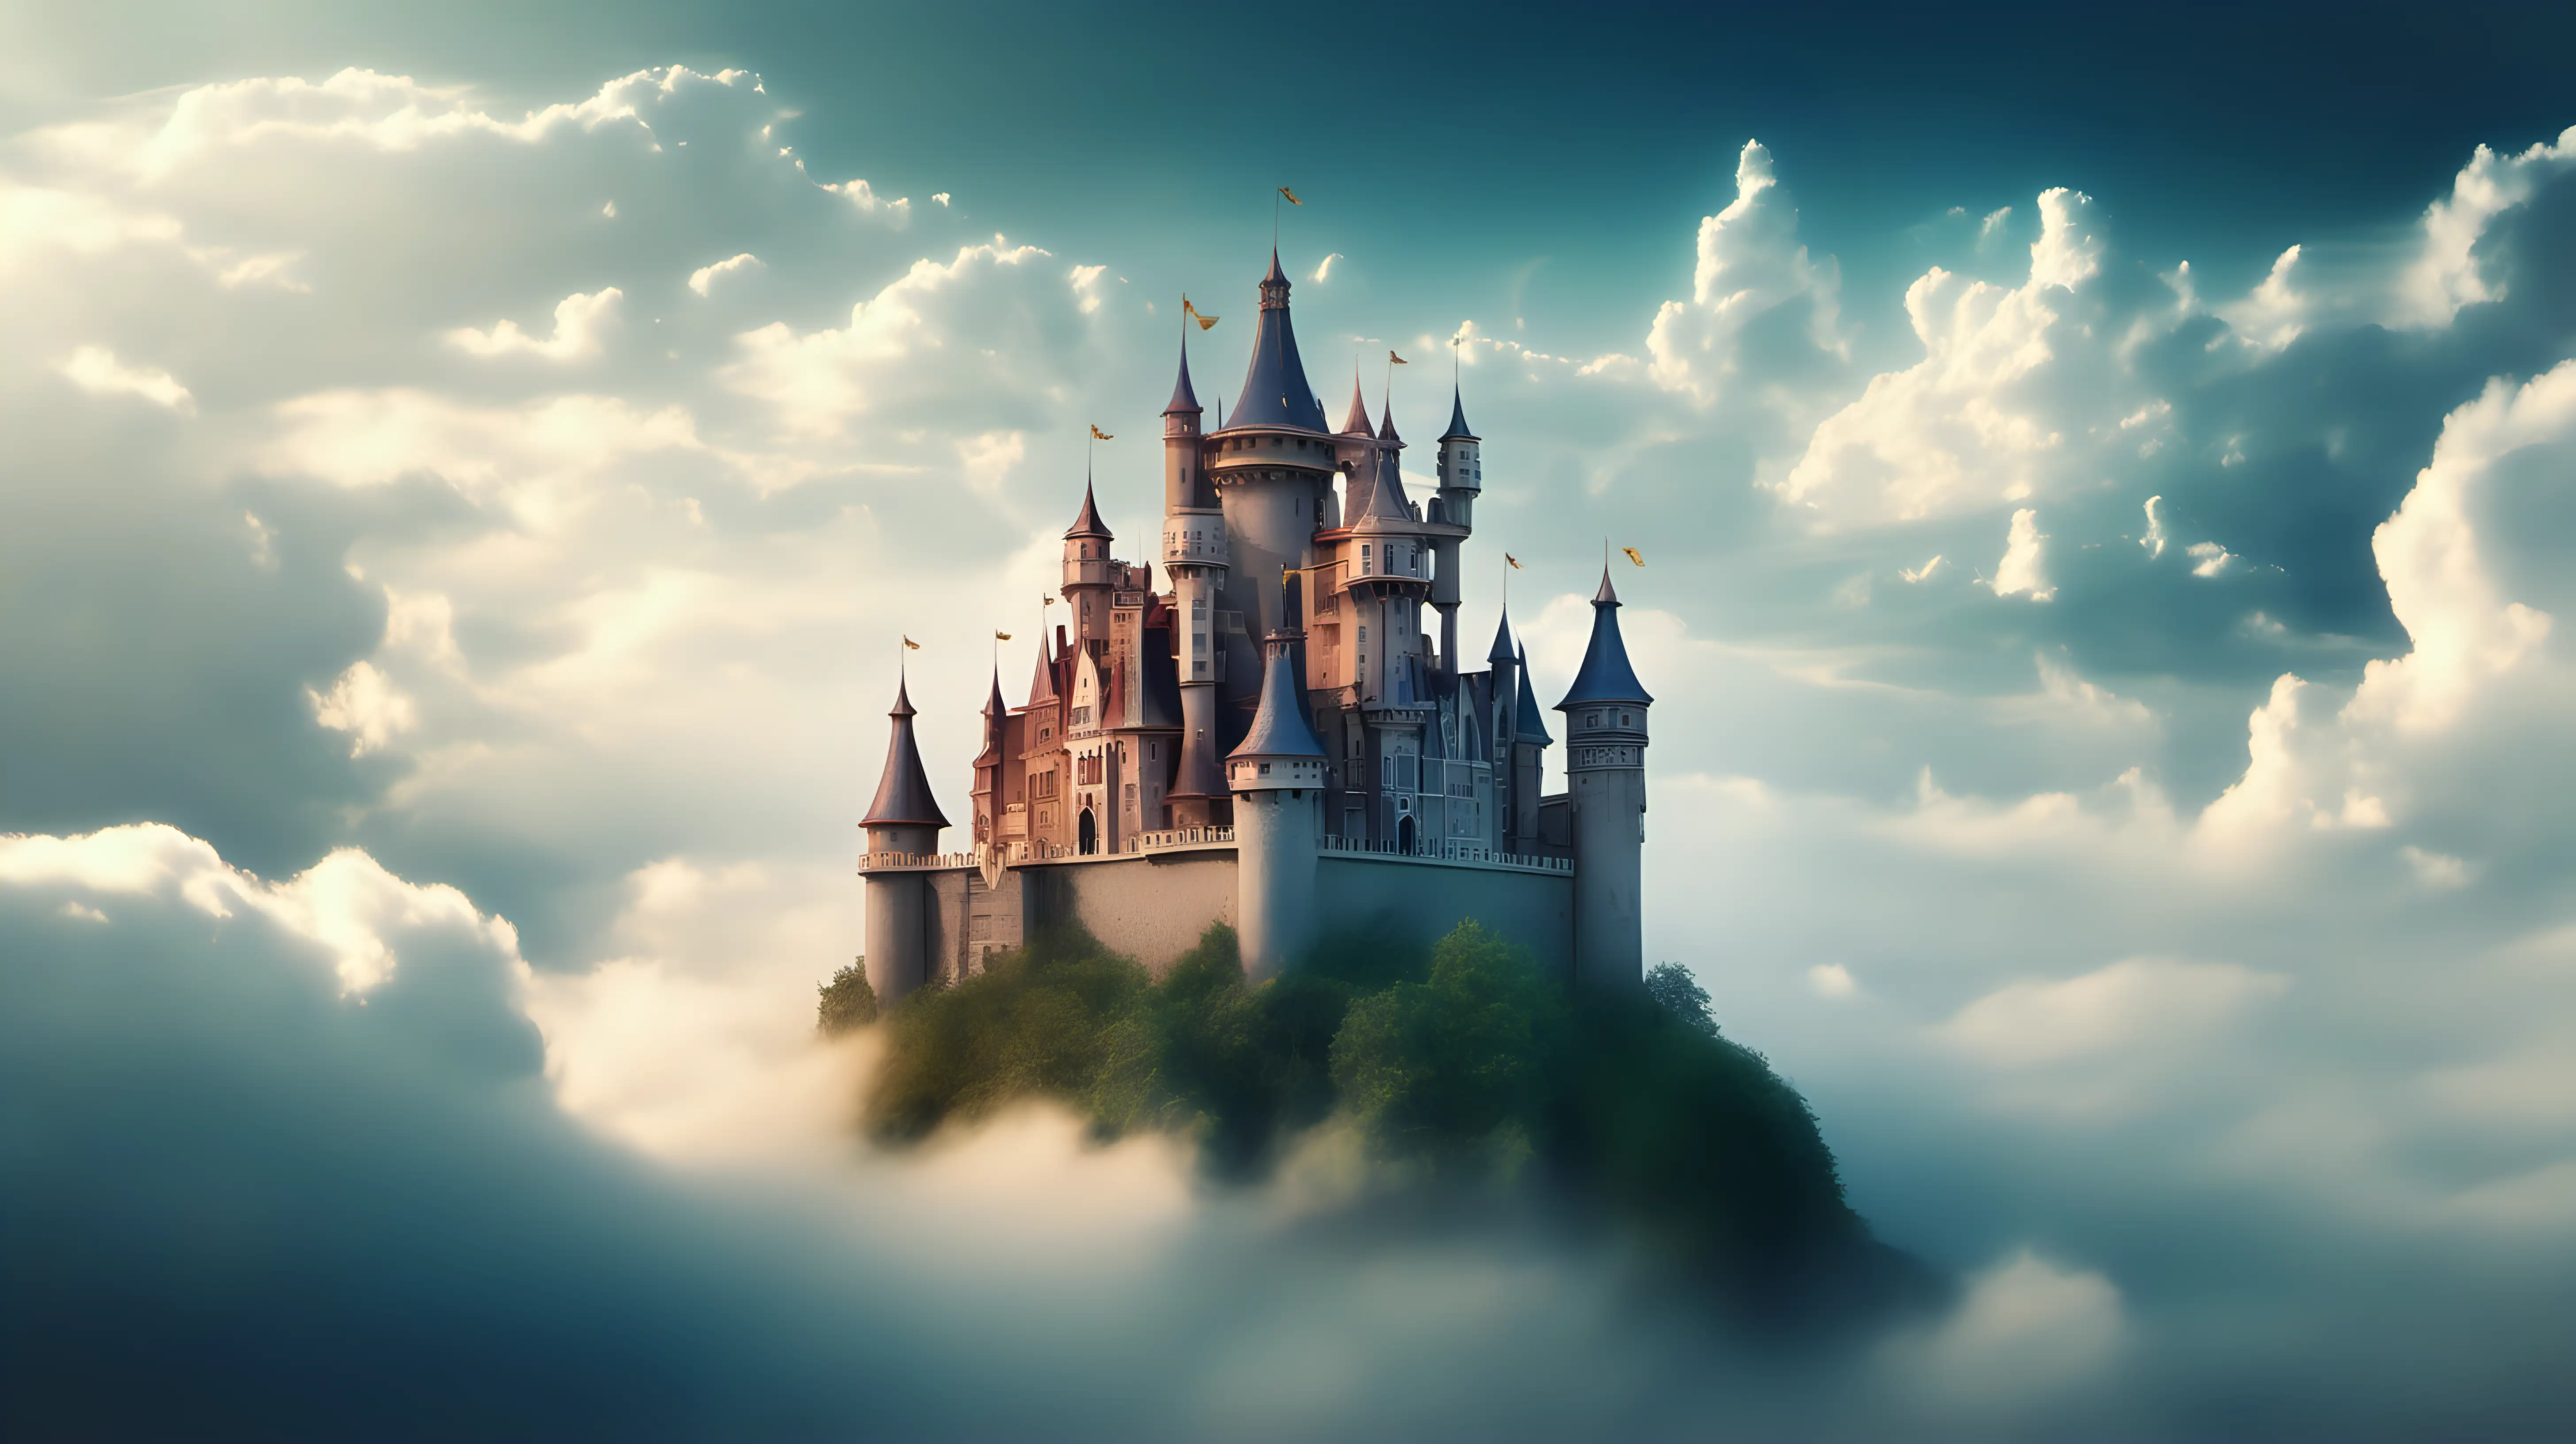 Enchanted fairy-tale castle in the clouds.